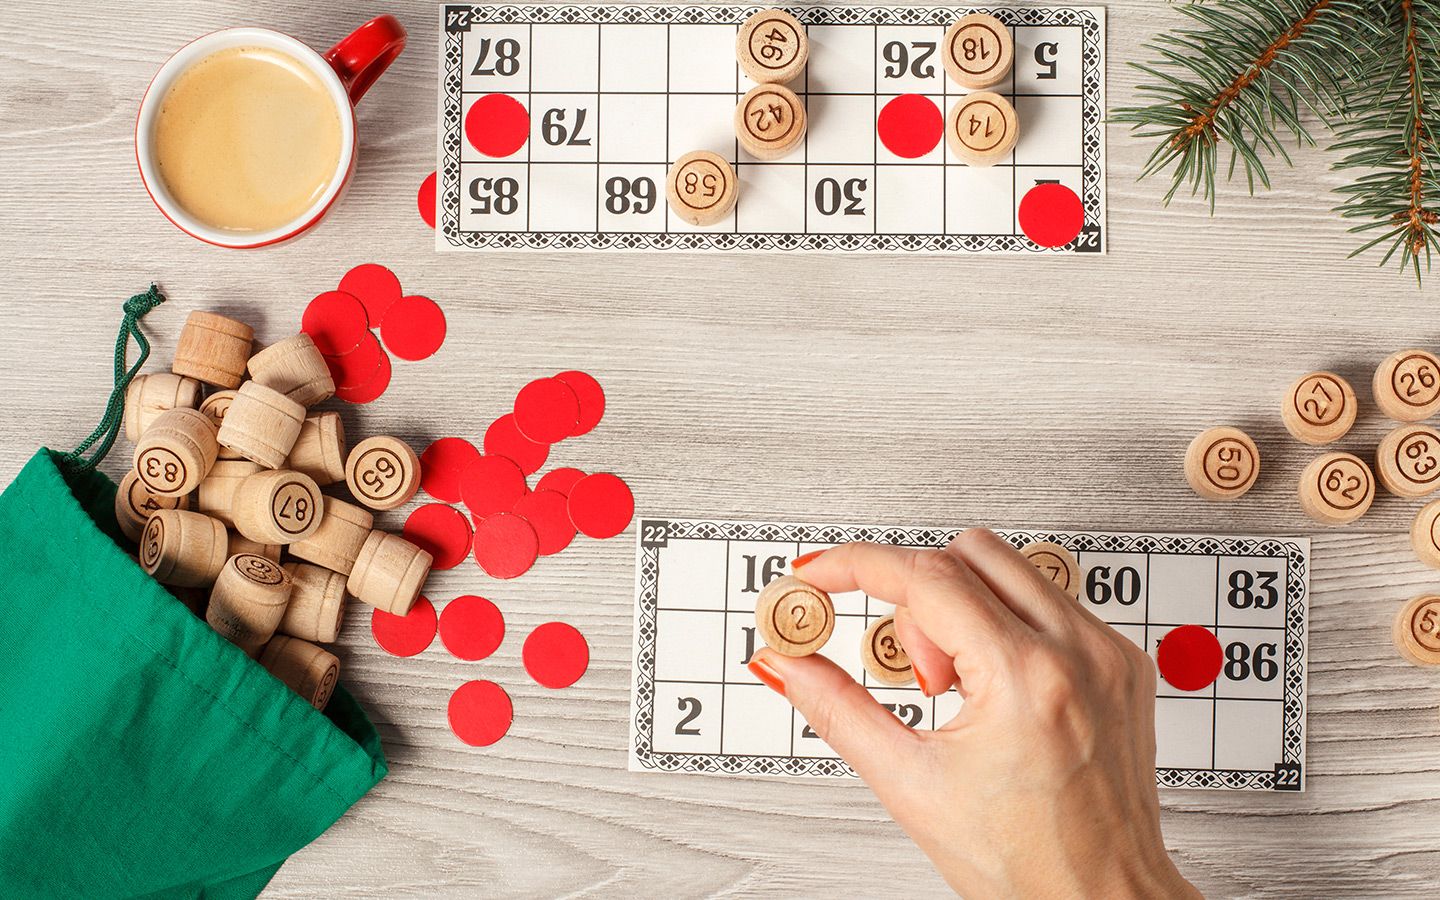 50 Super Fun Games to Play at Home as a Family